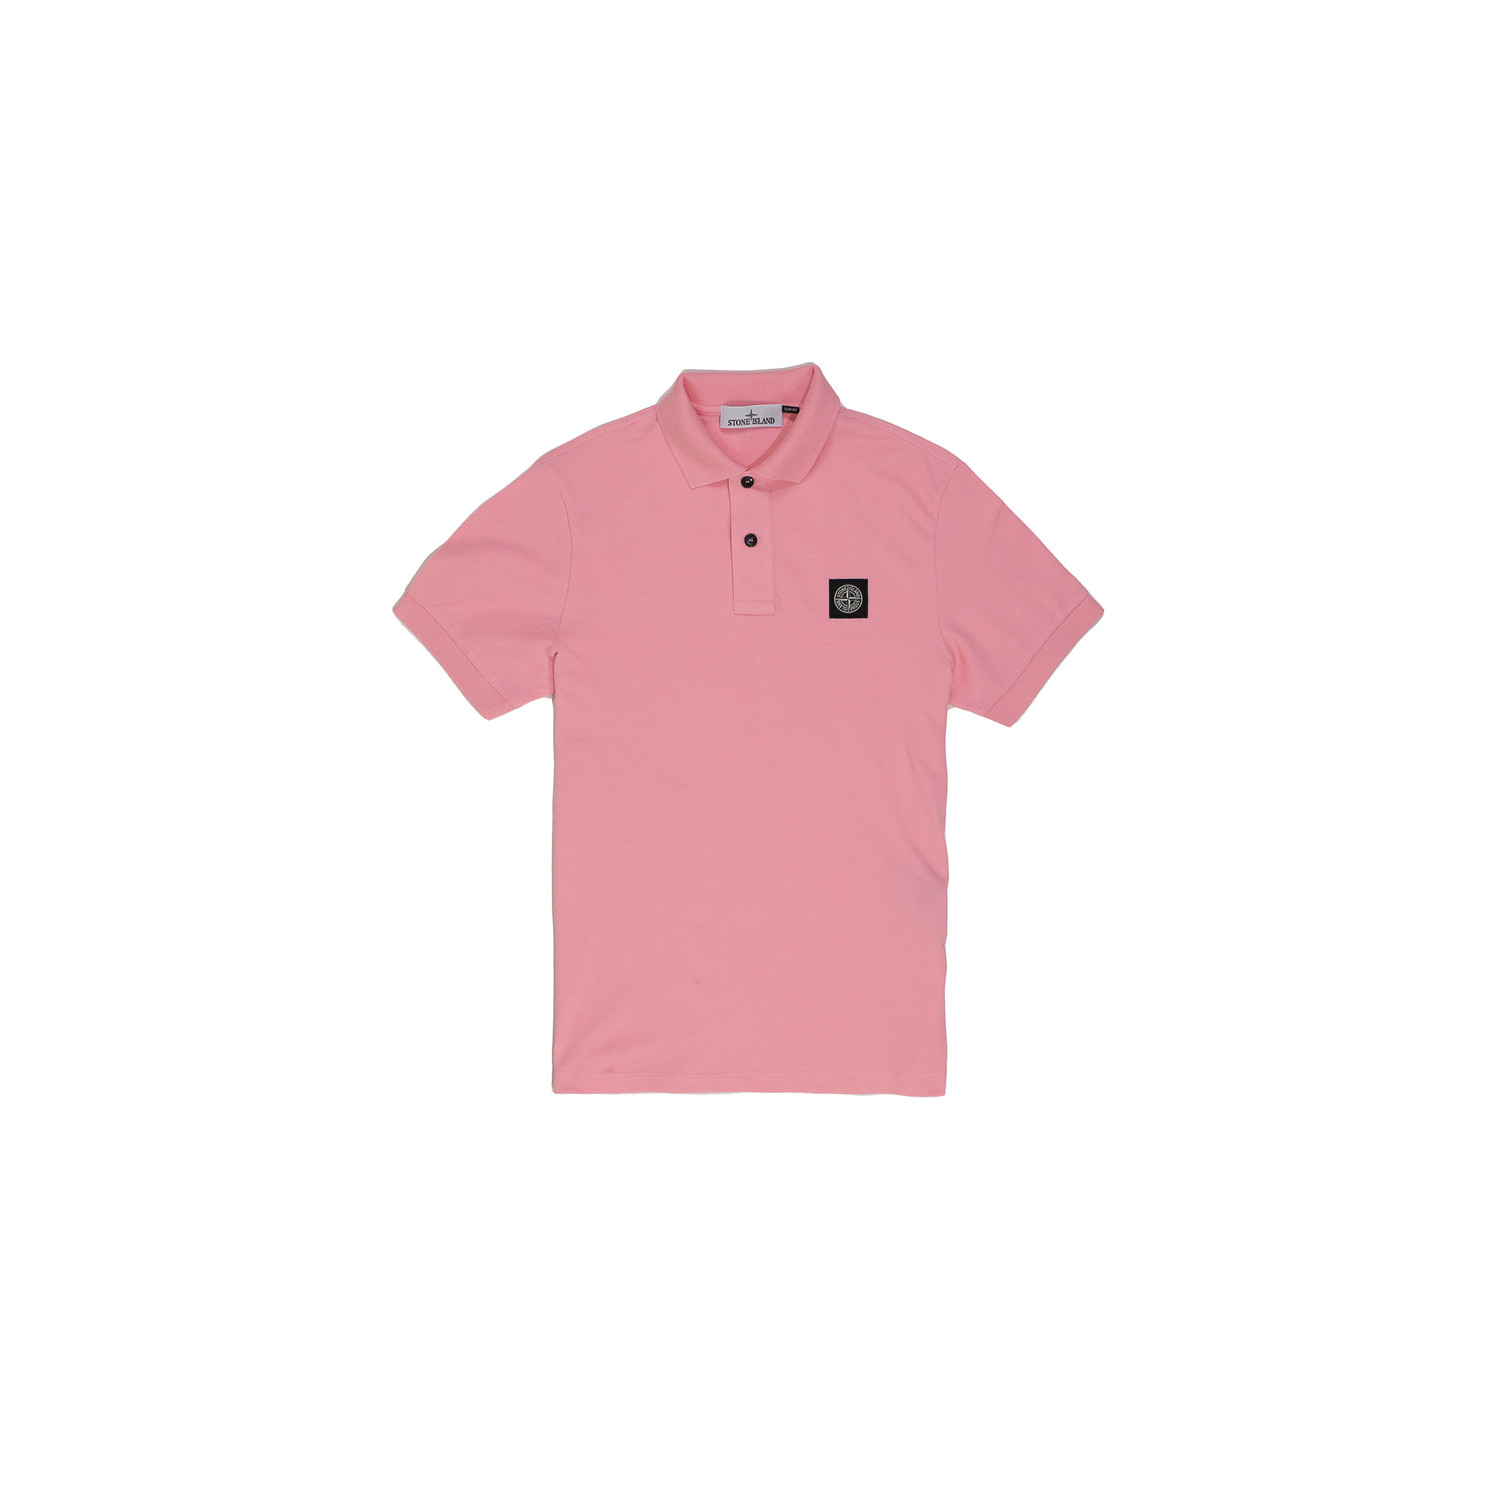 Abnormaal Persoonlijk Mentaliteit STONE ISLAND POLO ROZE - Vic Fashion for Men